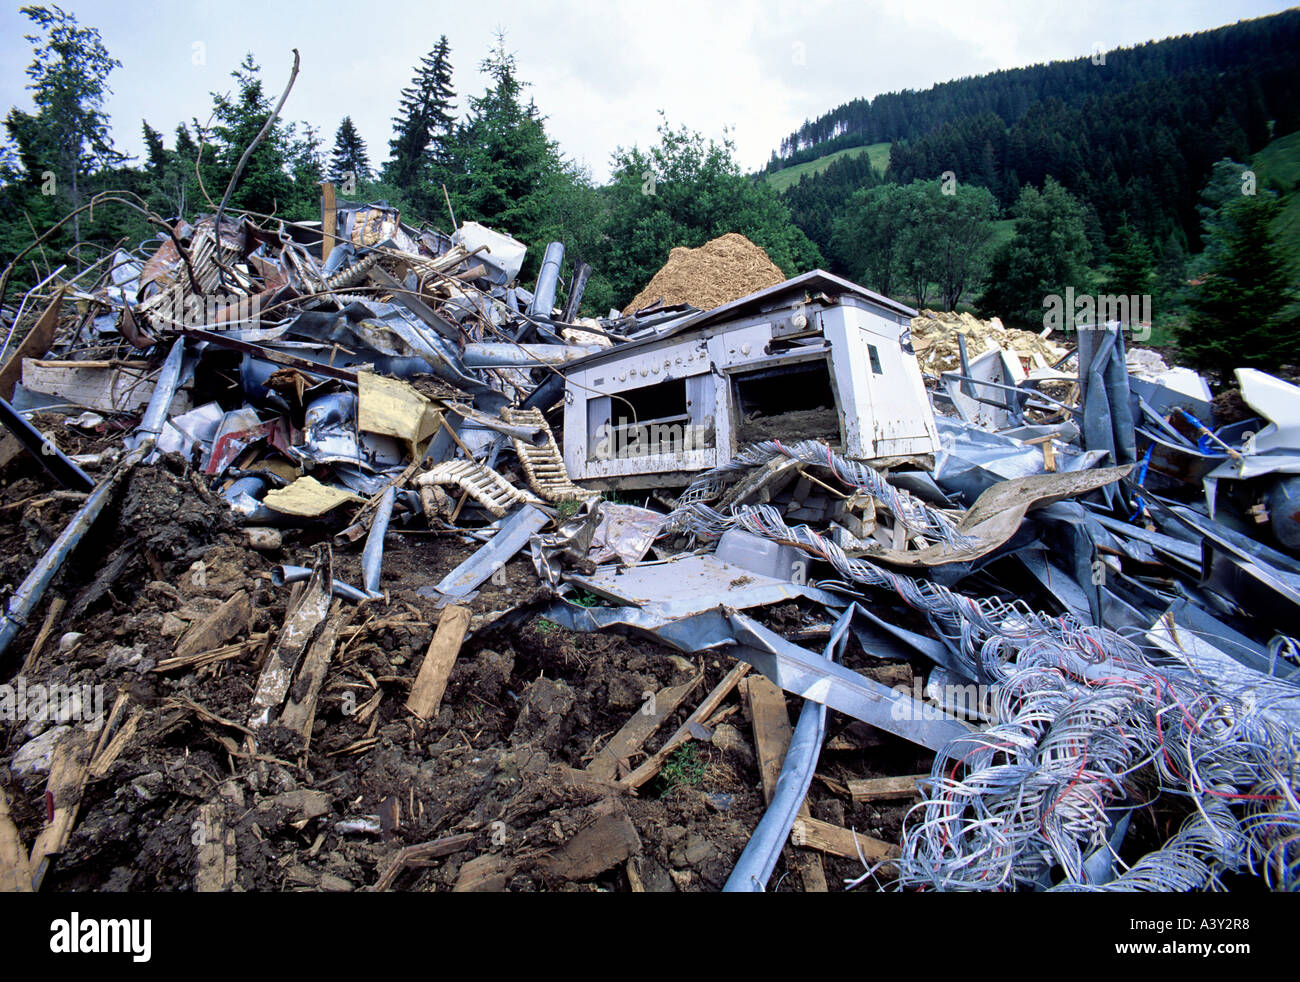 historic picture year of 1996 collected metalware for recycling cottages destroyed by mudslide switzerland Stock Photo